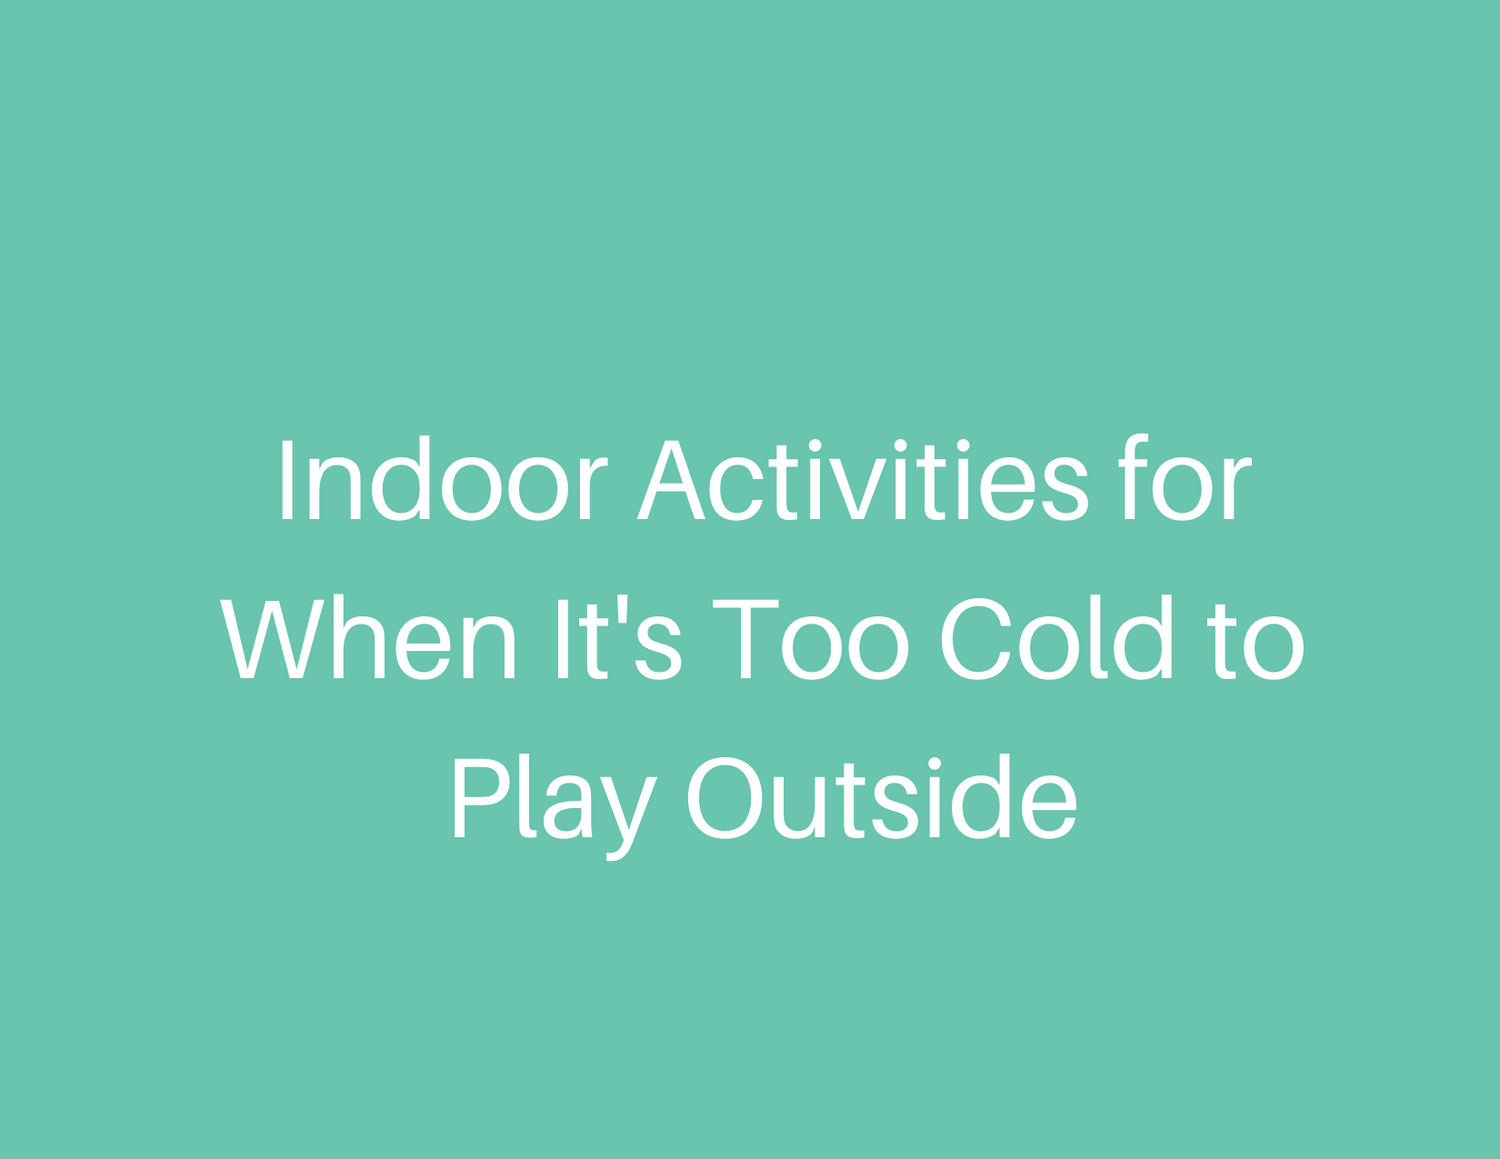 Indoor Activities for When It's Too Cold to Play Outside